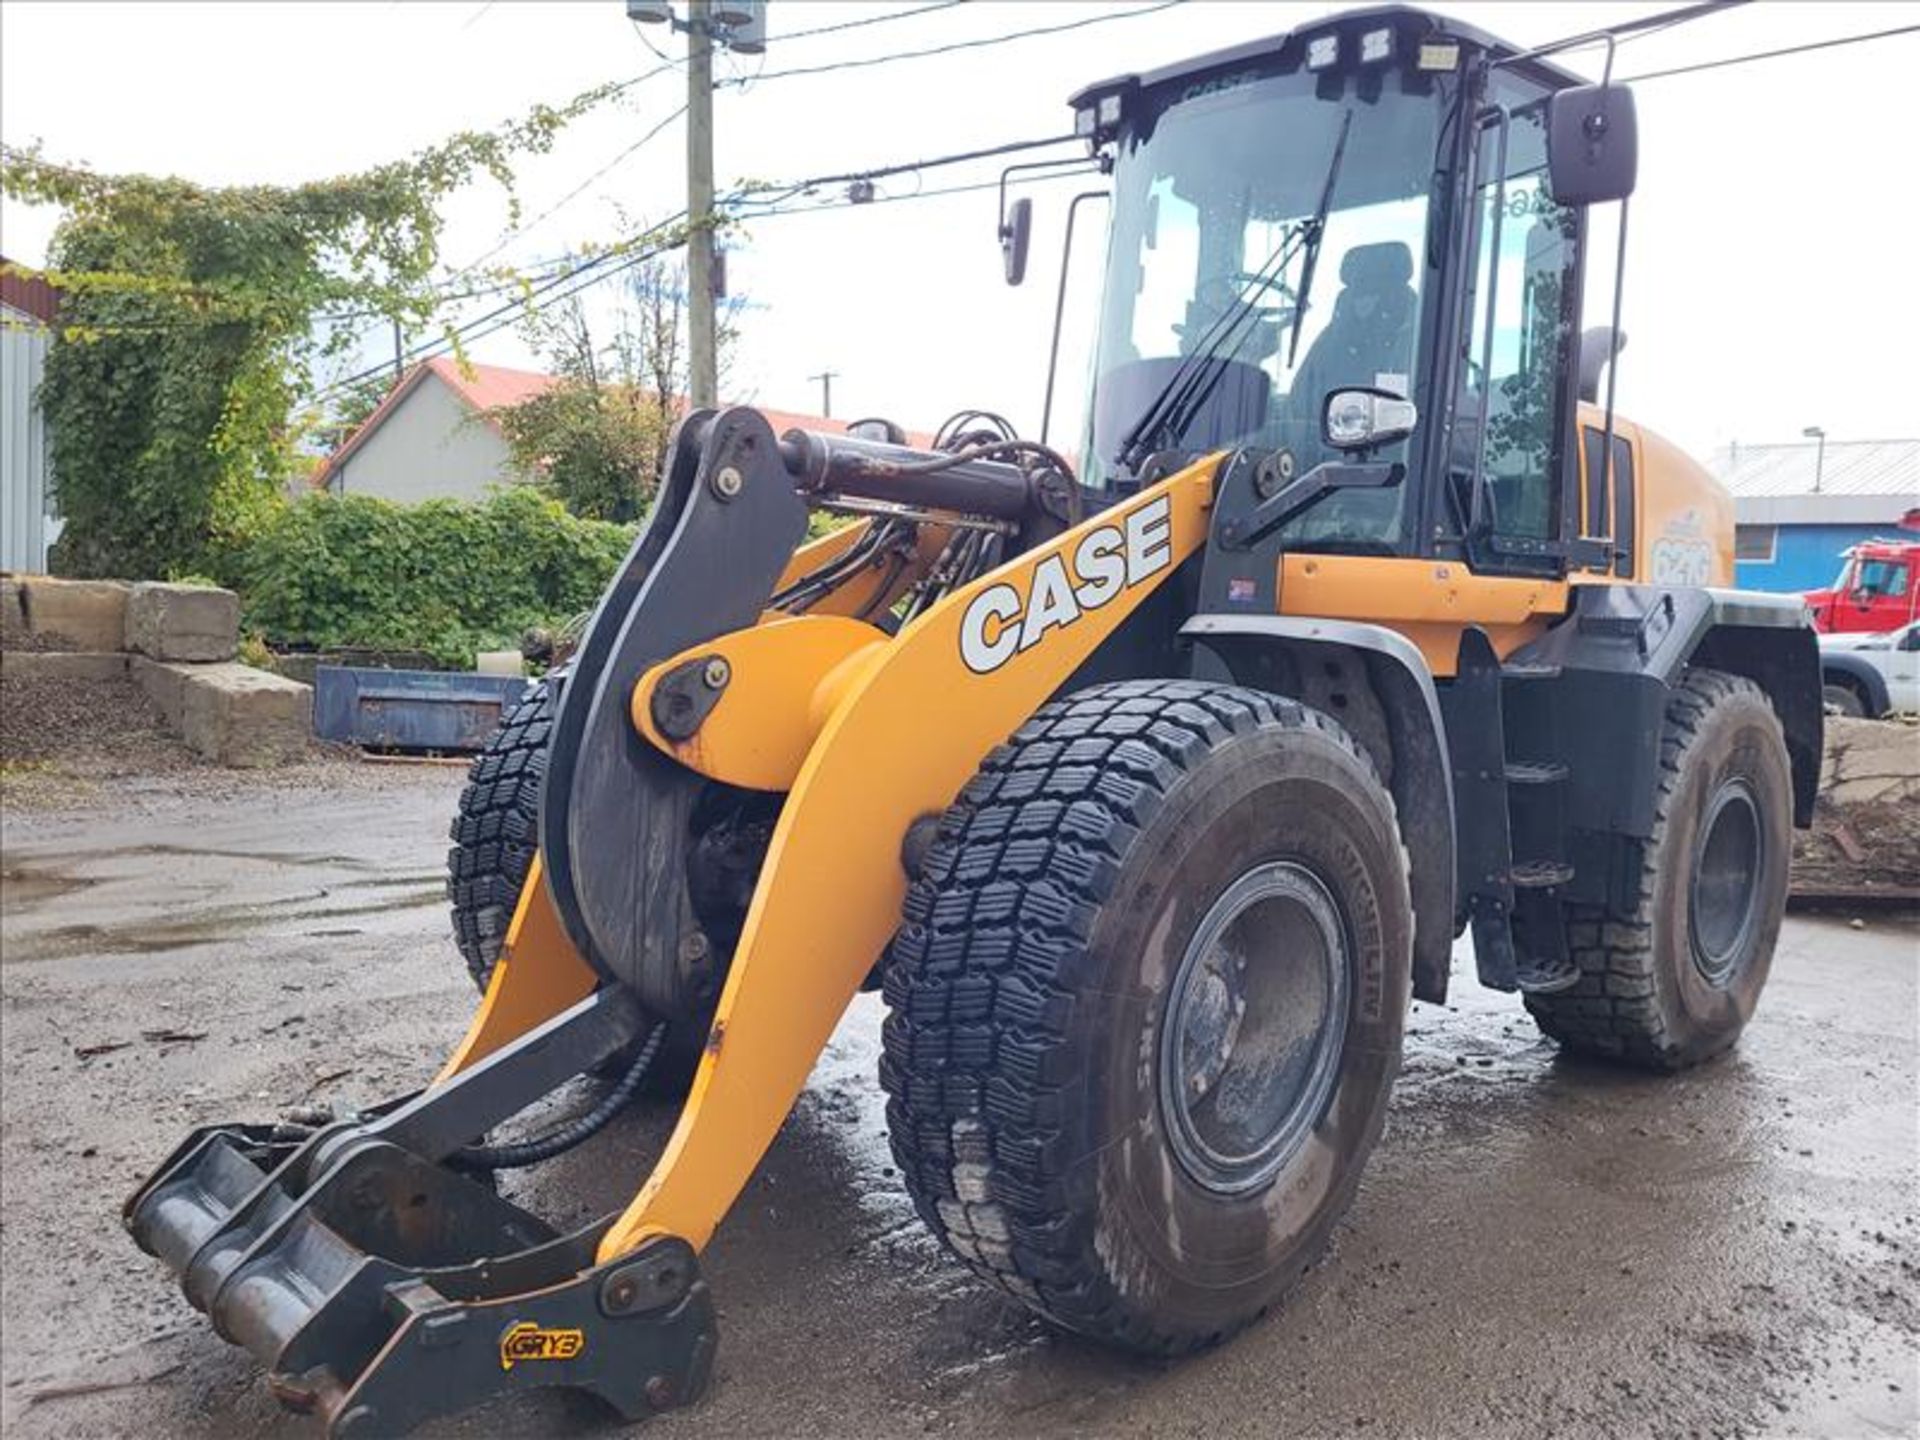 Case 621G Wheel Loader, enclosed cab, auxiliairy hydraulic system, GRYB Q/C, rearview camera, X